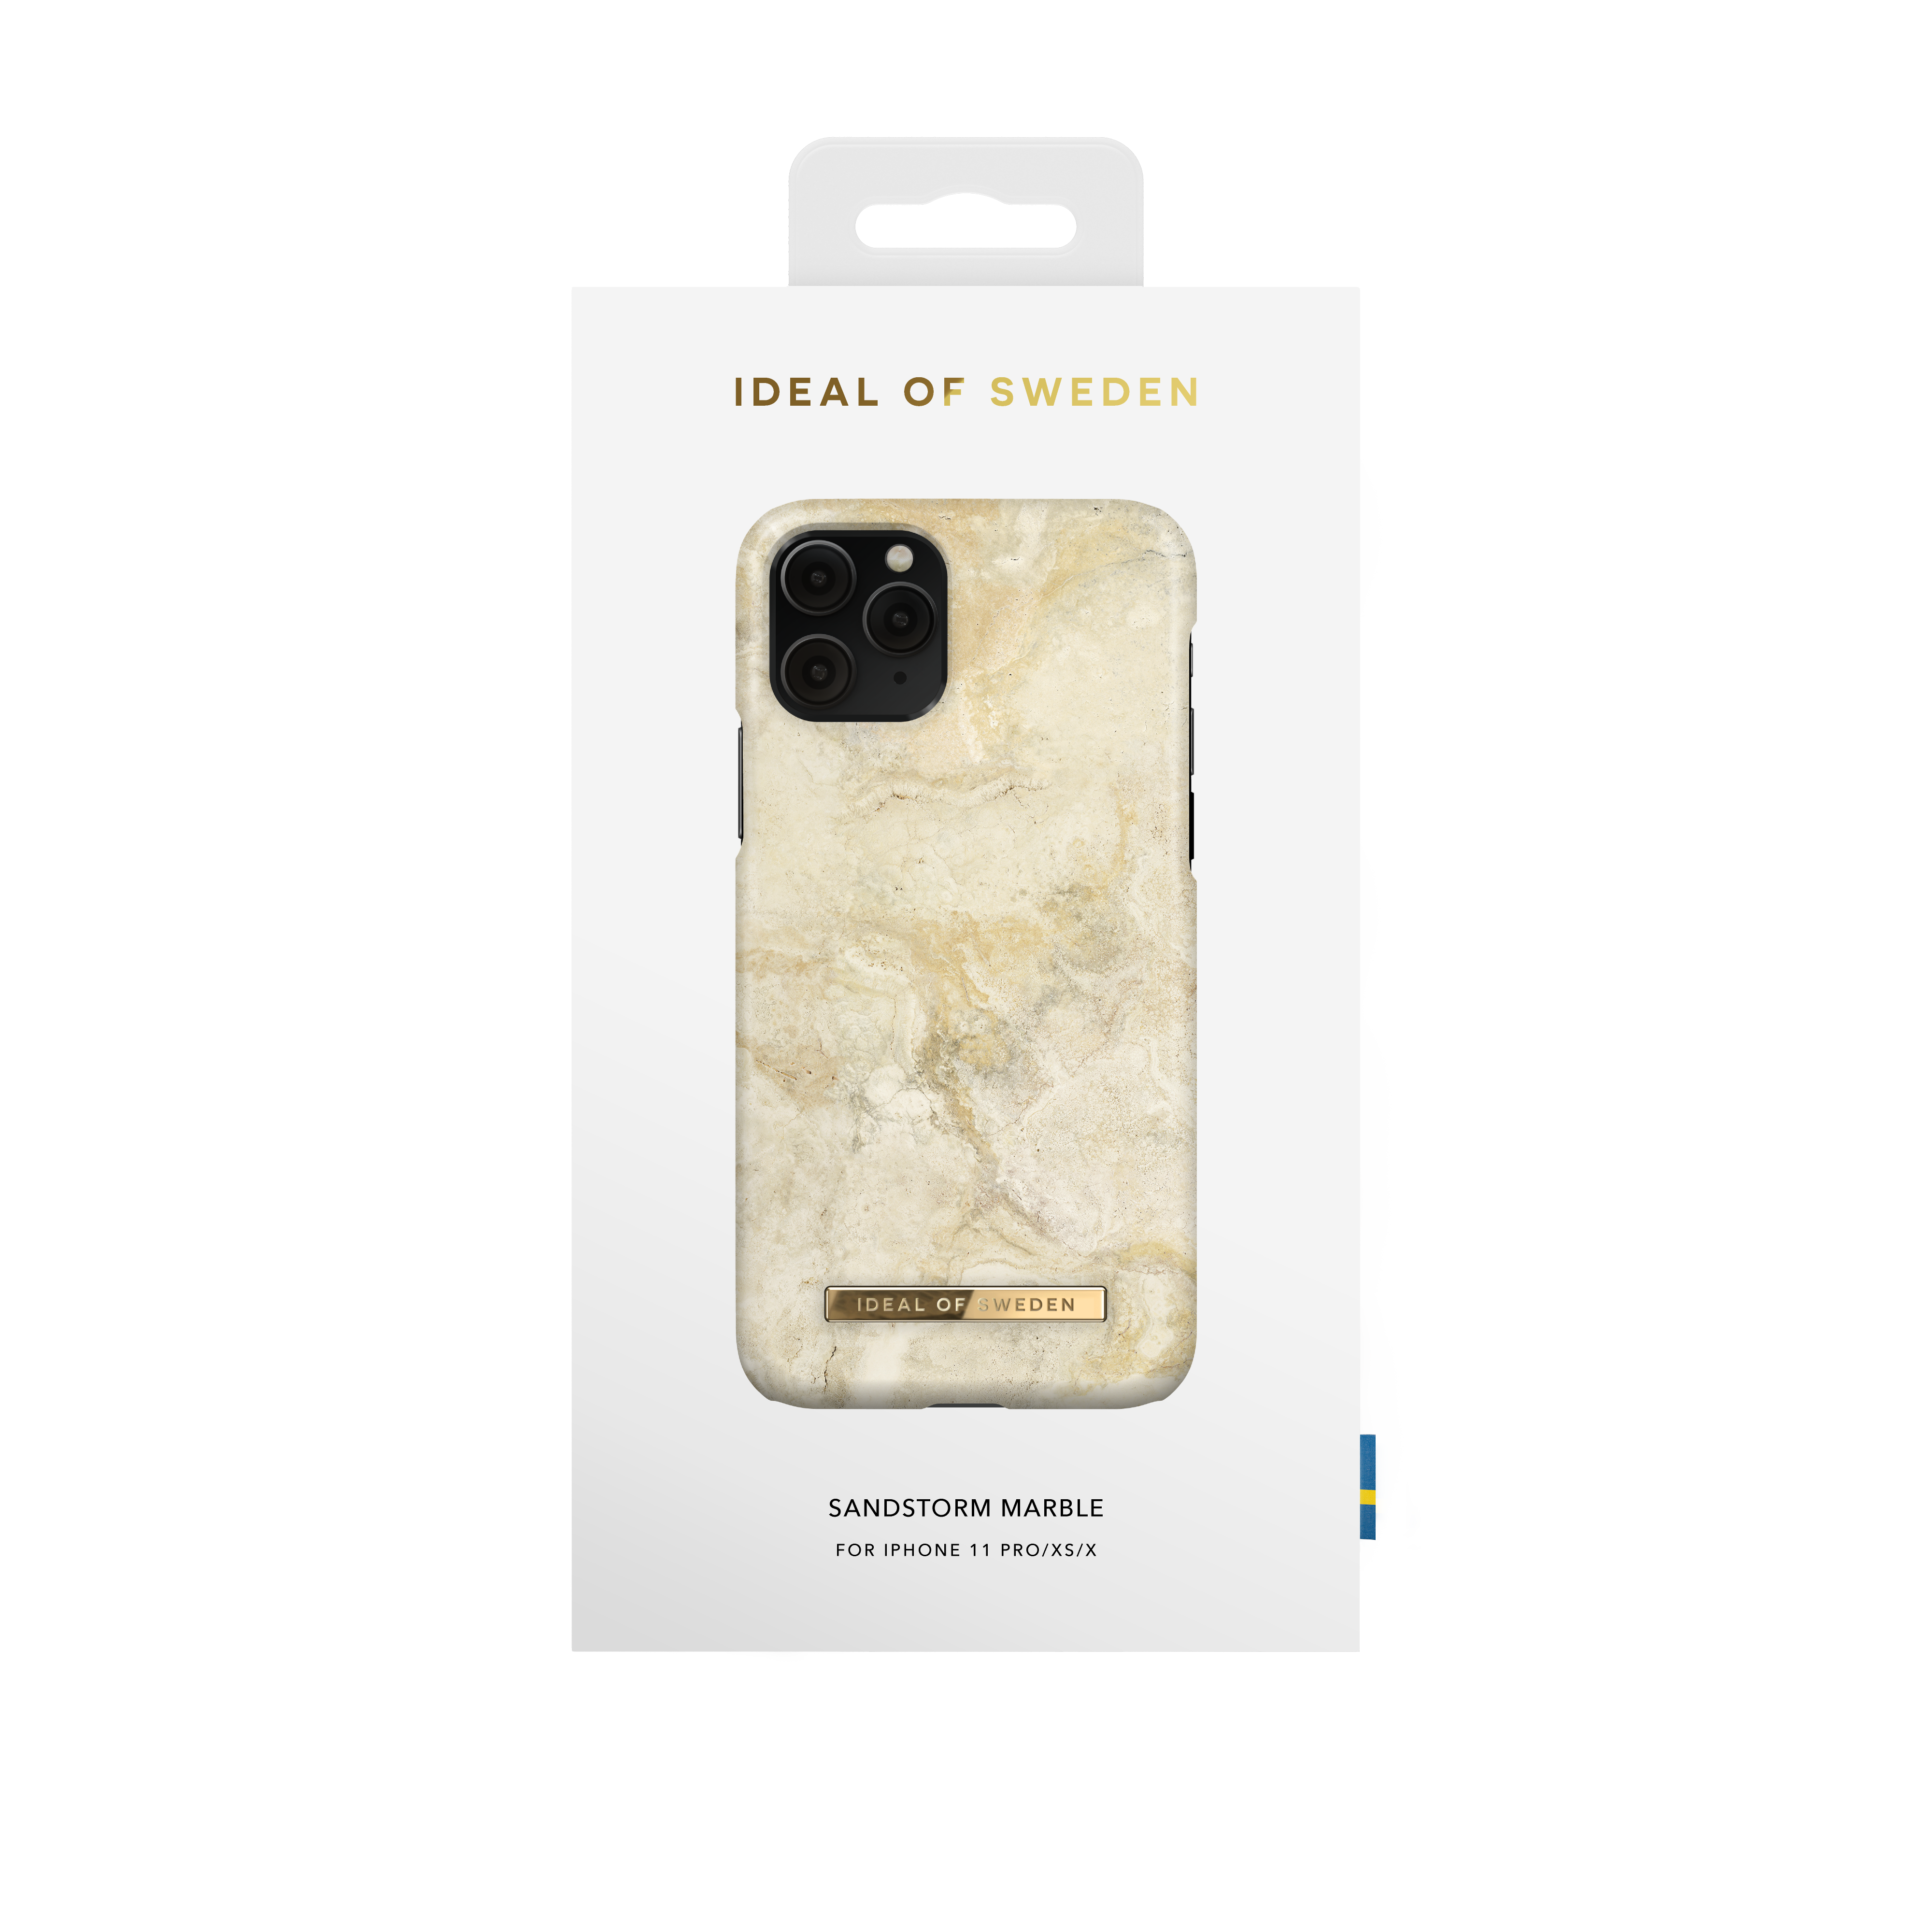 iPhone IDEAL Backcover, X, iPhone XS, Pro, Marble IDFCSS20-I1958-195, iPhone Sandstorm Apple, SWEDEN 11 OF